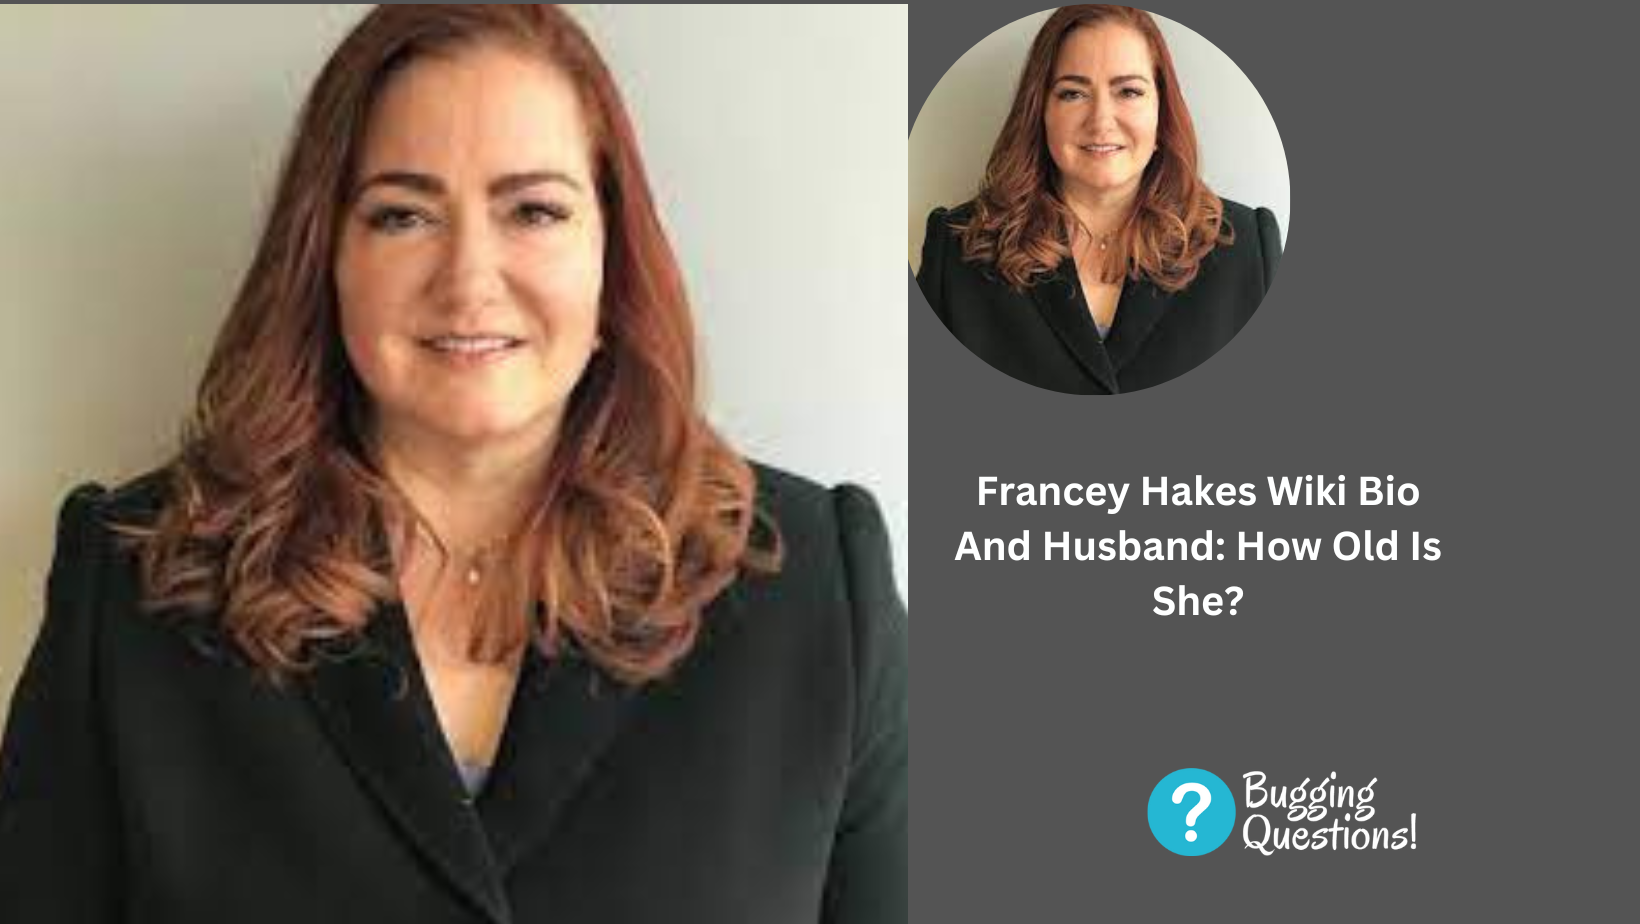 Francey Hakes Wiki Bio And Husband: How Old Is She?